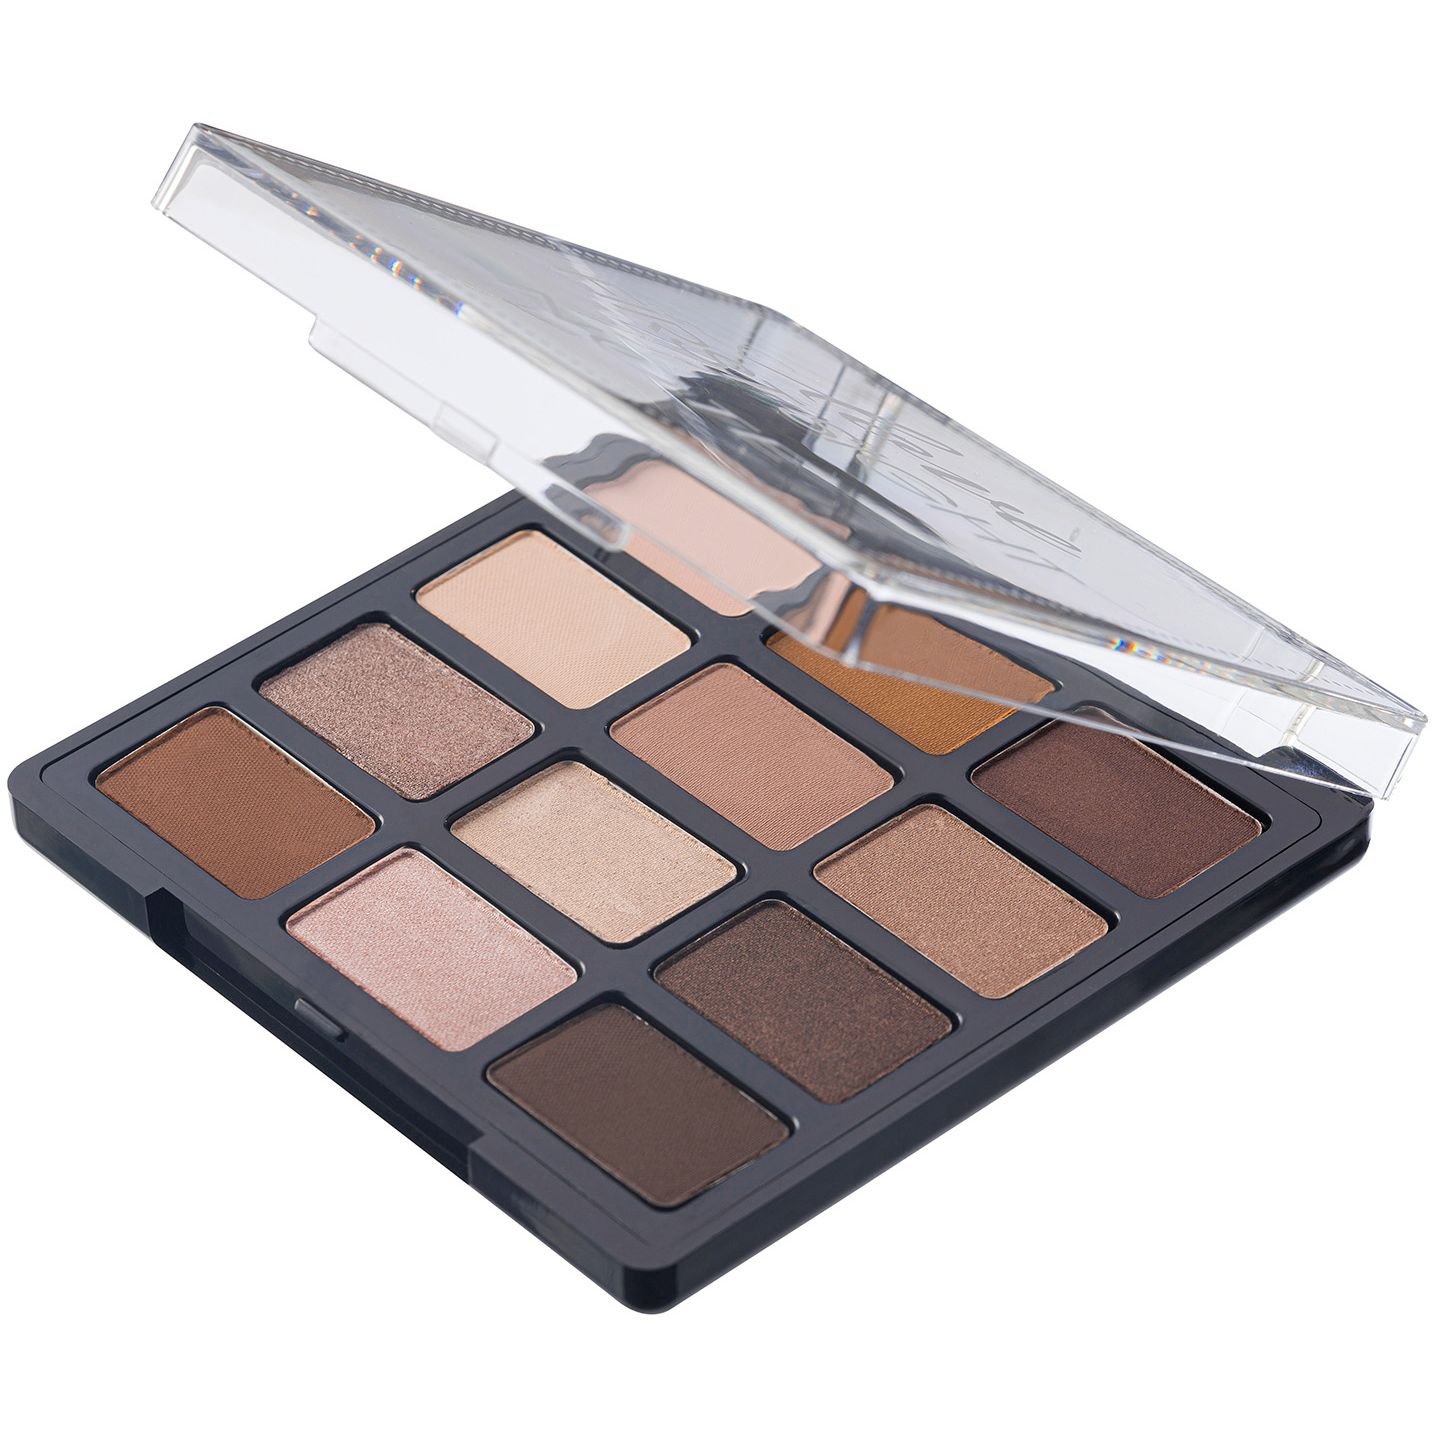 Палетка теней Note Cosmetique Love At First Sight Eyeshadow Palette тон 201 (Daily Routine) 15.6 г - фото 2